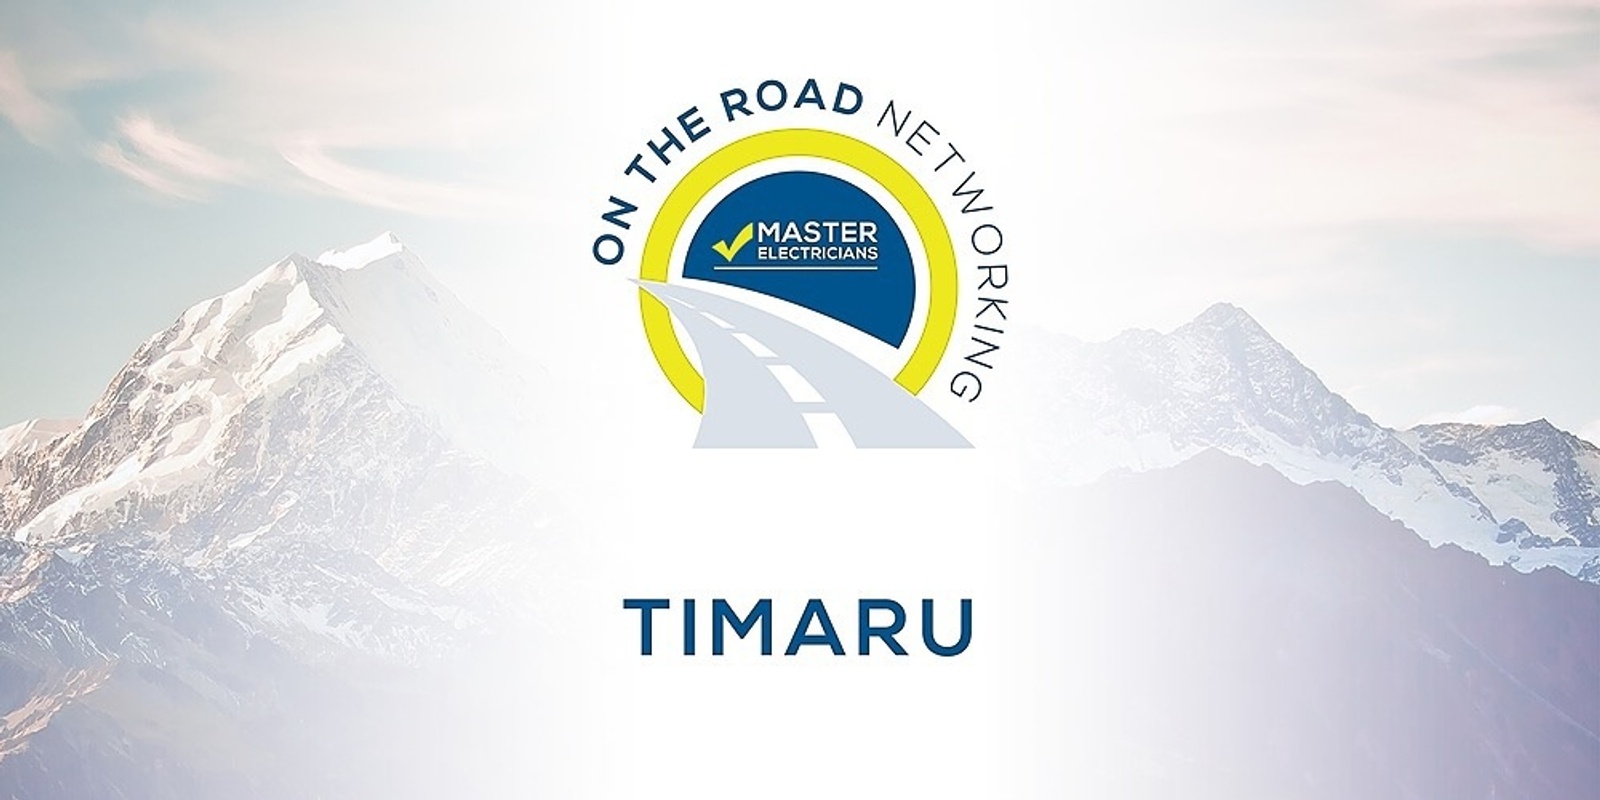 On the Road Networking - Timaru